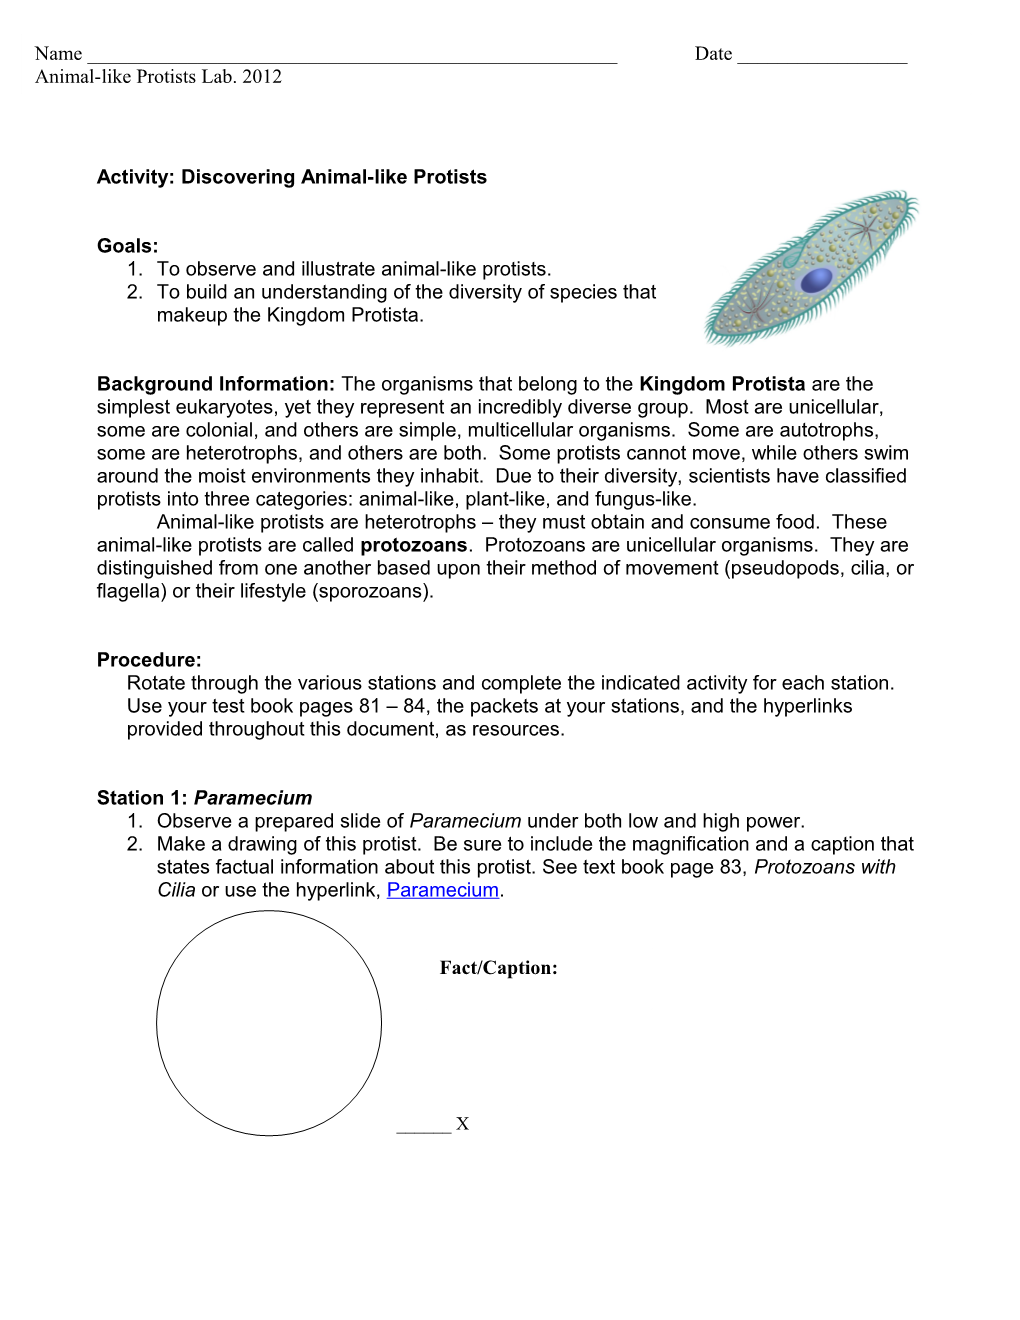 Activity: Discovering Protists